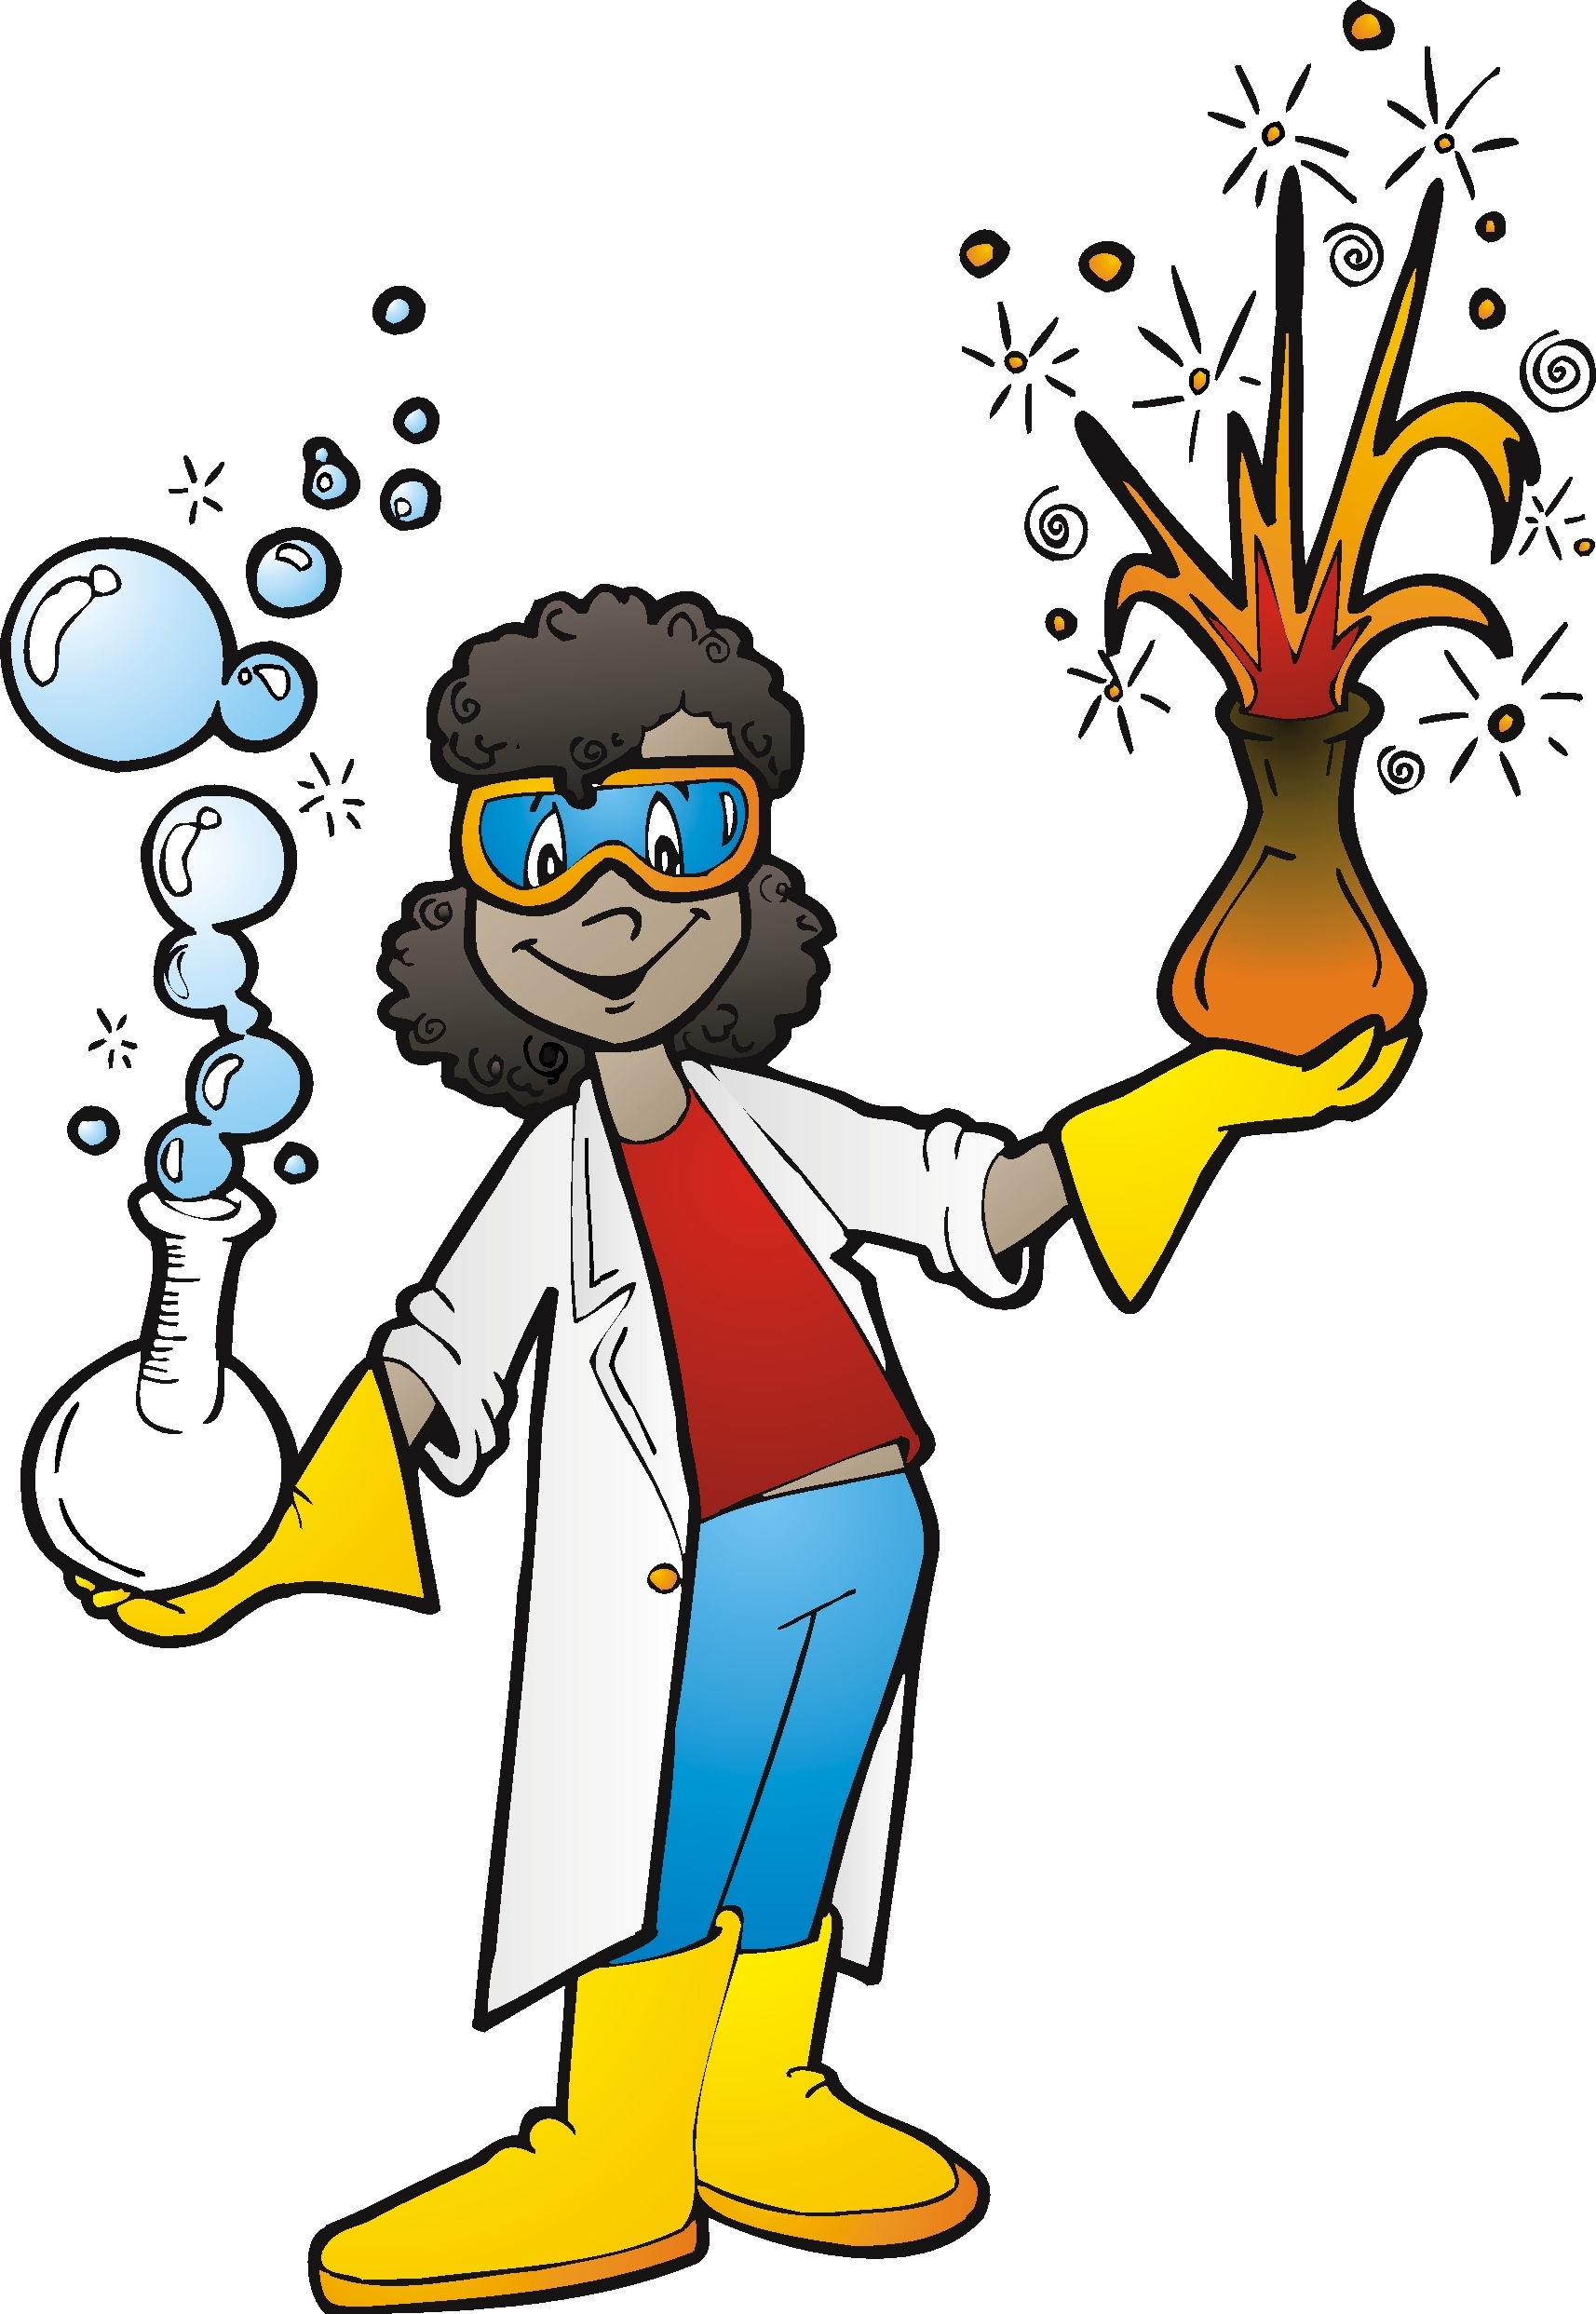 Science Tools Clipart Black And White 9tp8qzrte Jpeg